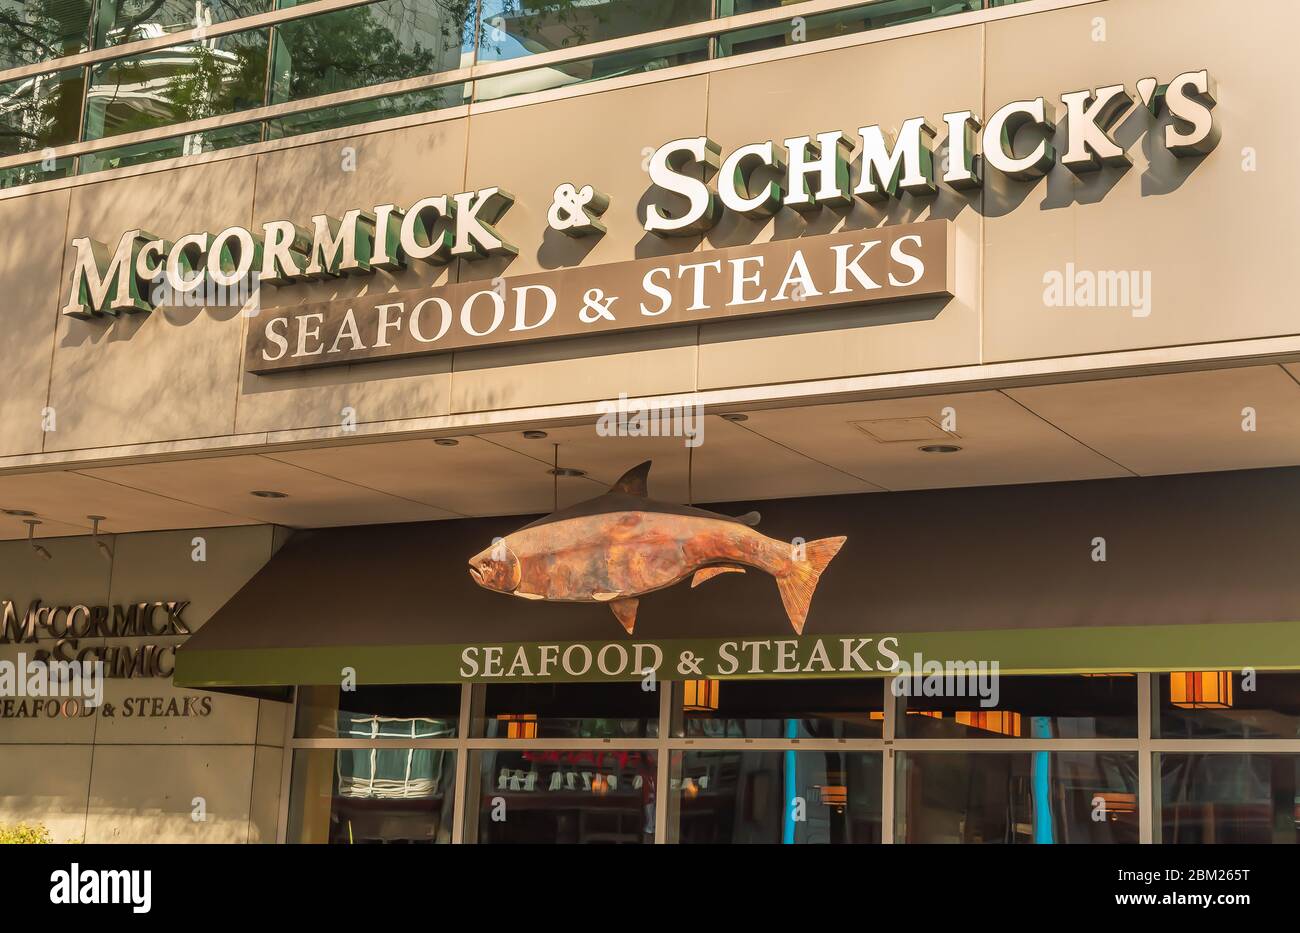 Charlotte, NC/USA - May 26, 2019: Facade of 'McCormick & Schmick's Seafood & Steaks' restaurant showing brand in white letters with hanging fish sign. Stock Photo